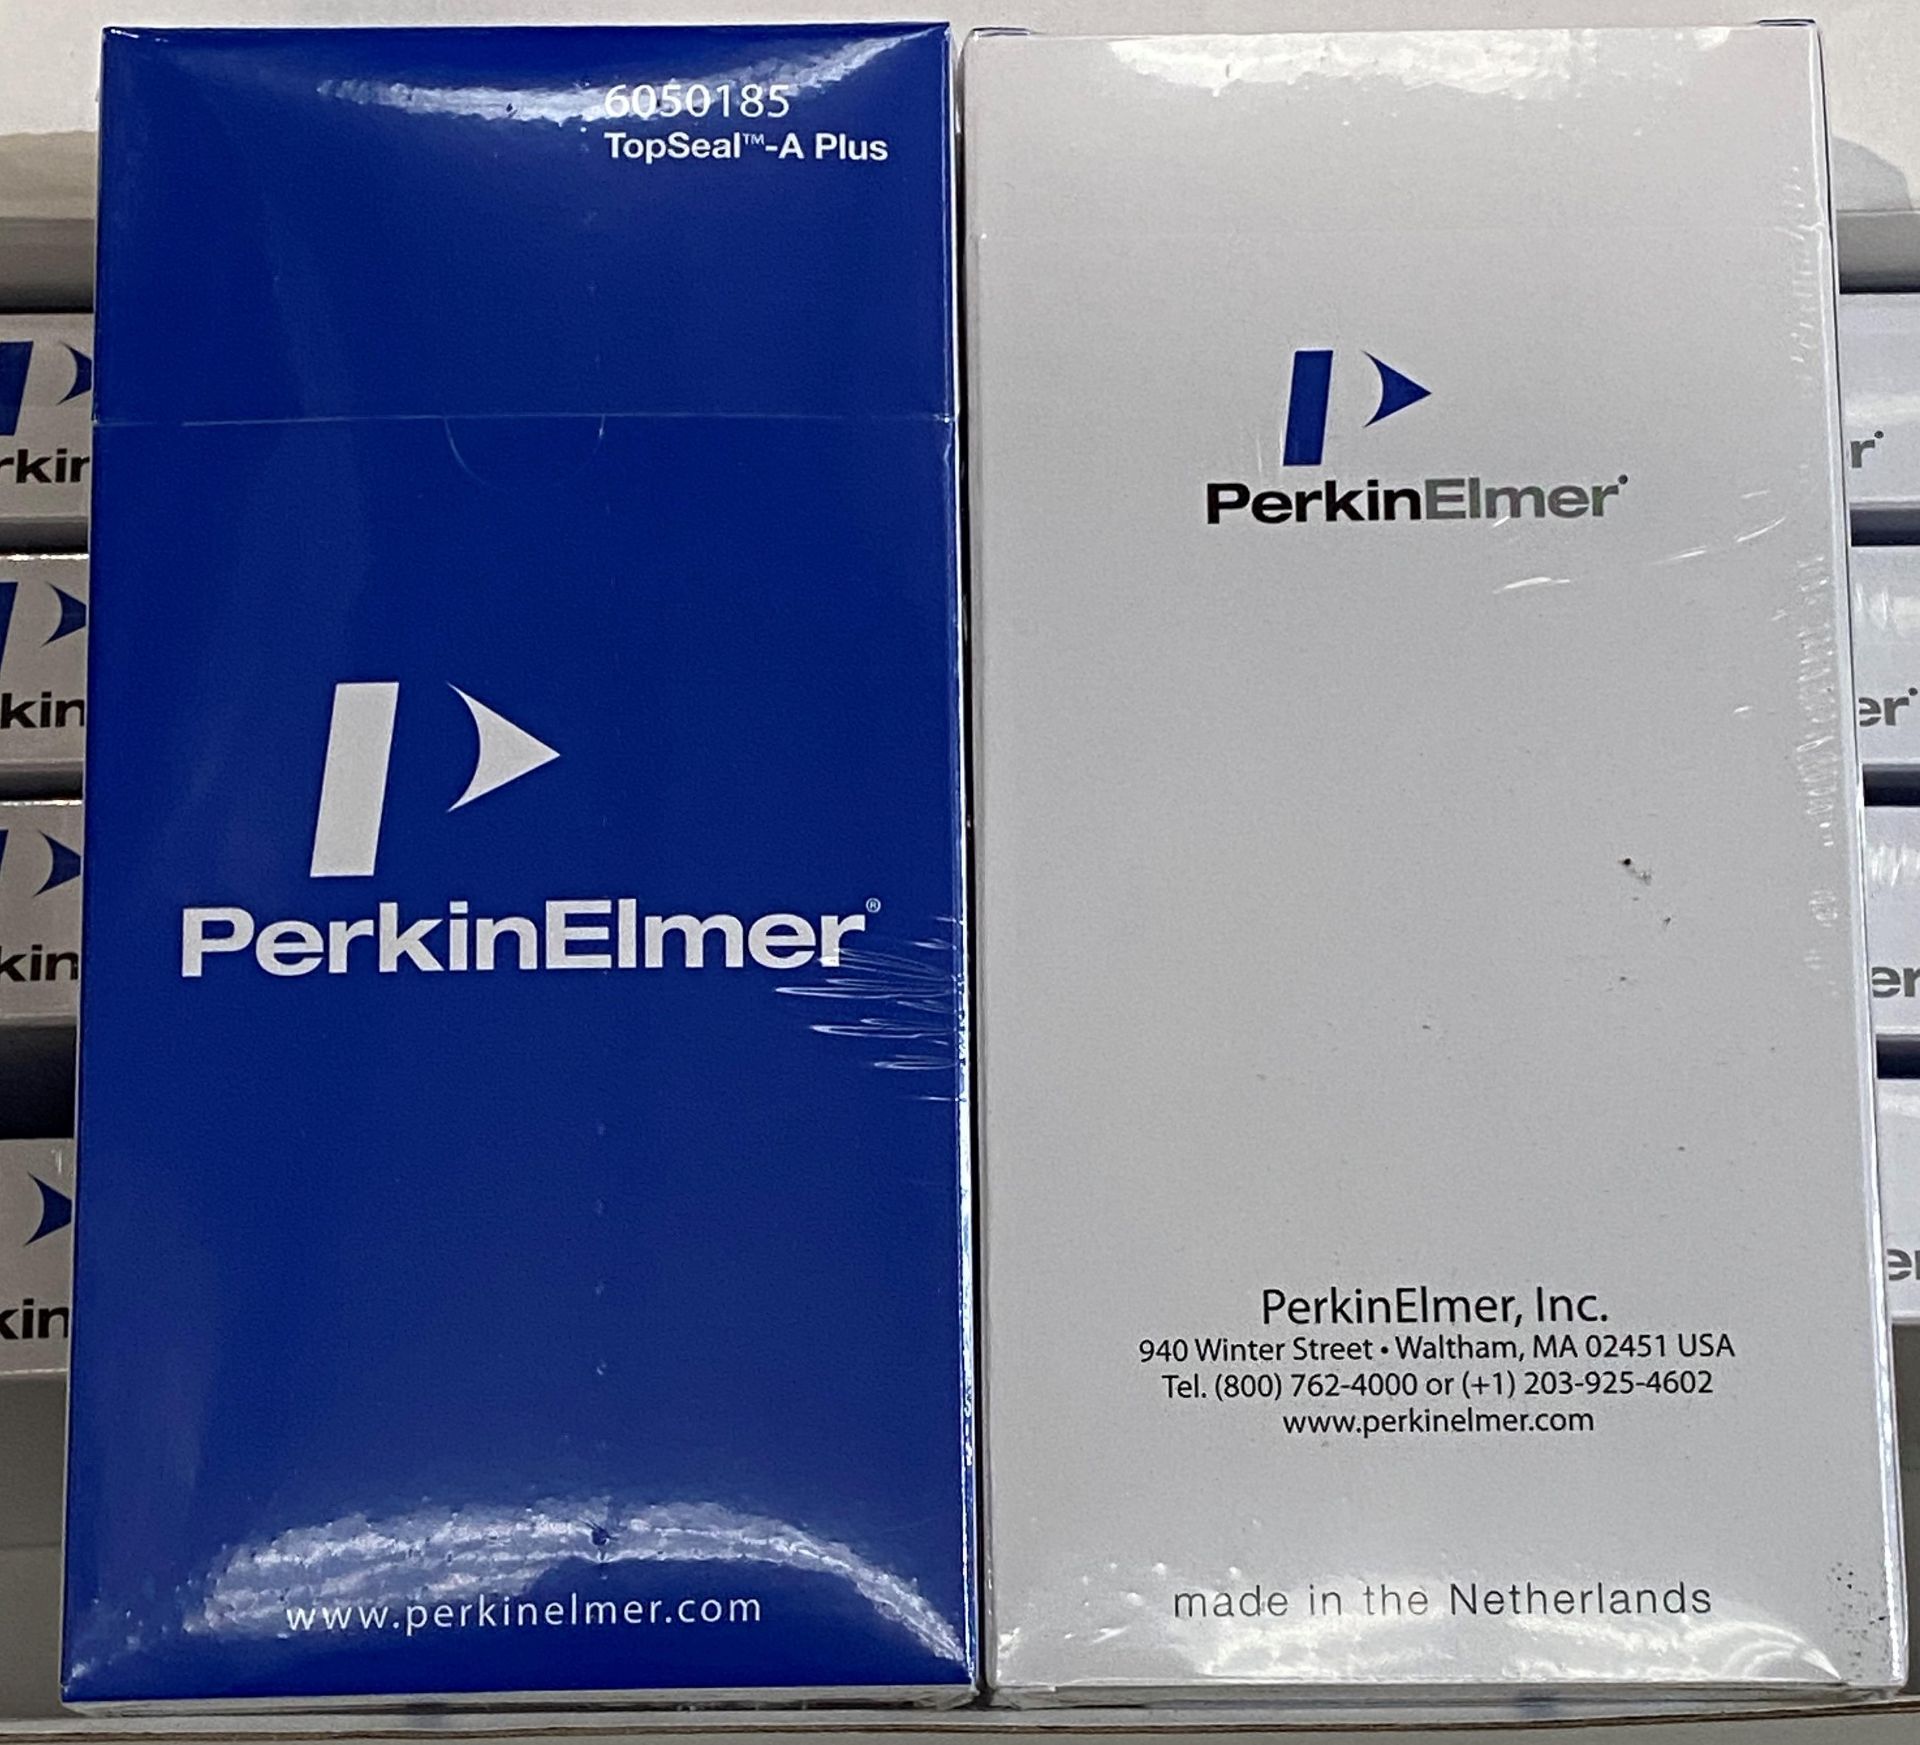 200 x Packs of PerkinElmer Top Seal - A Plus 6050185 clear adhesive microplate seals - 100 units